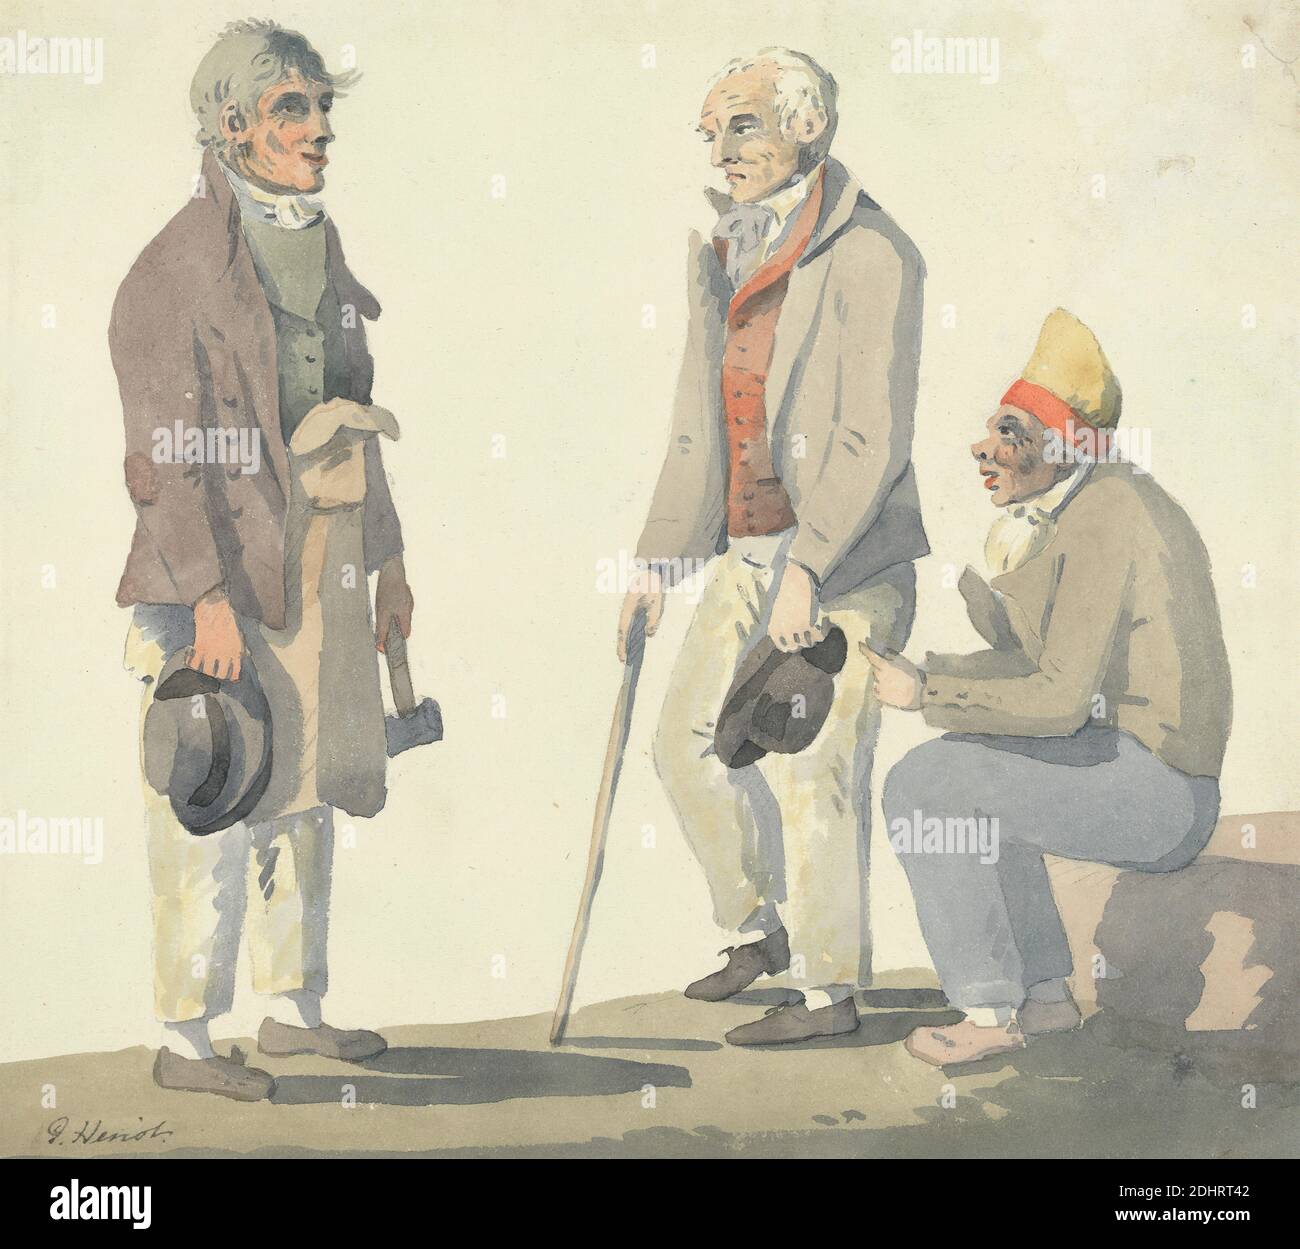 Canadian Figure Studies, George Heriot, 1766–1844, British, undated, Watercolor and graphite on medium, slightly textured, cream wove paper, Sheet: 8 1/4 × 9 1/4 inches (21 × 23.5 cm), Canadian, cane, elderly, men Stock Photo